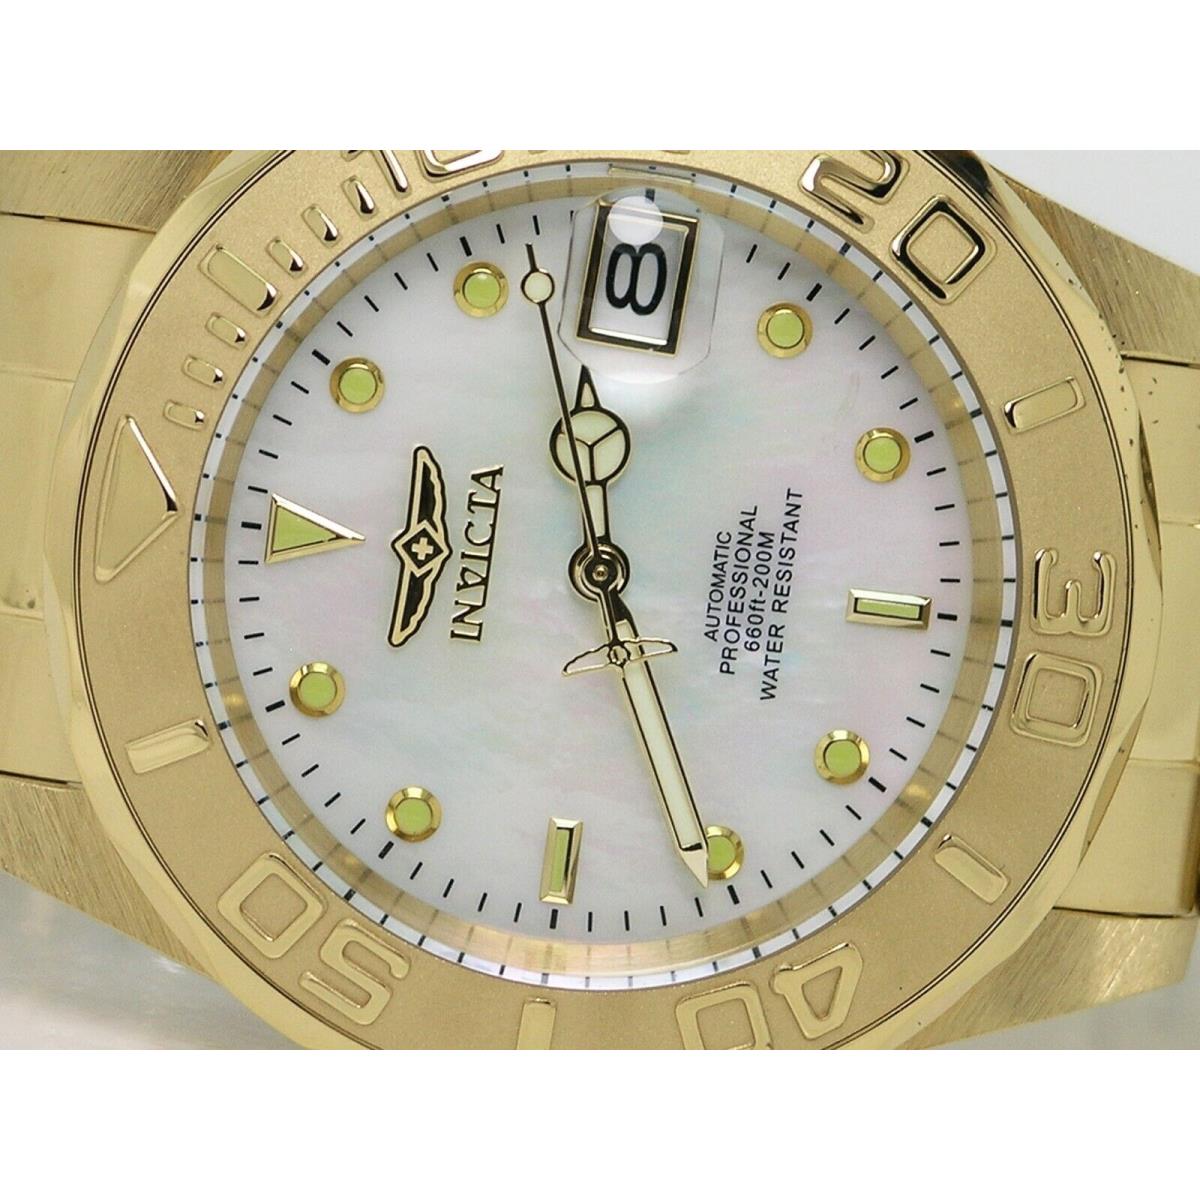 Invicta watch Pro Diver - White Dial, Gold Band, Gold Bezel